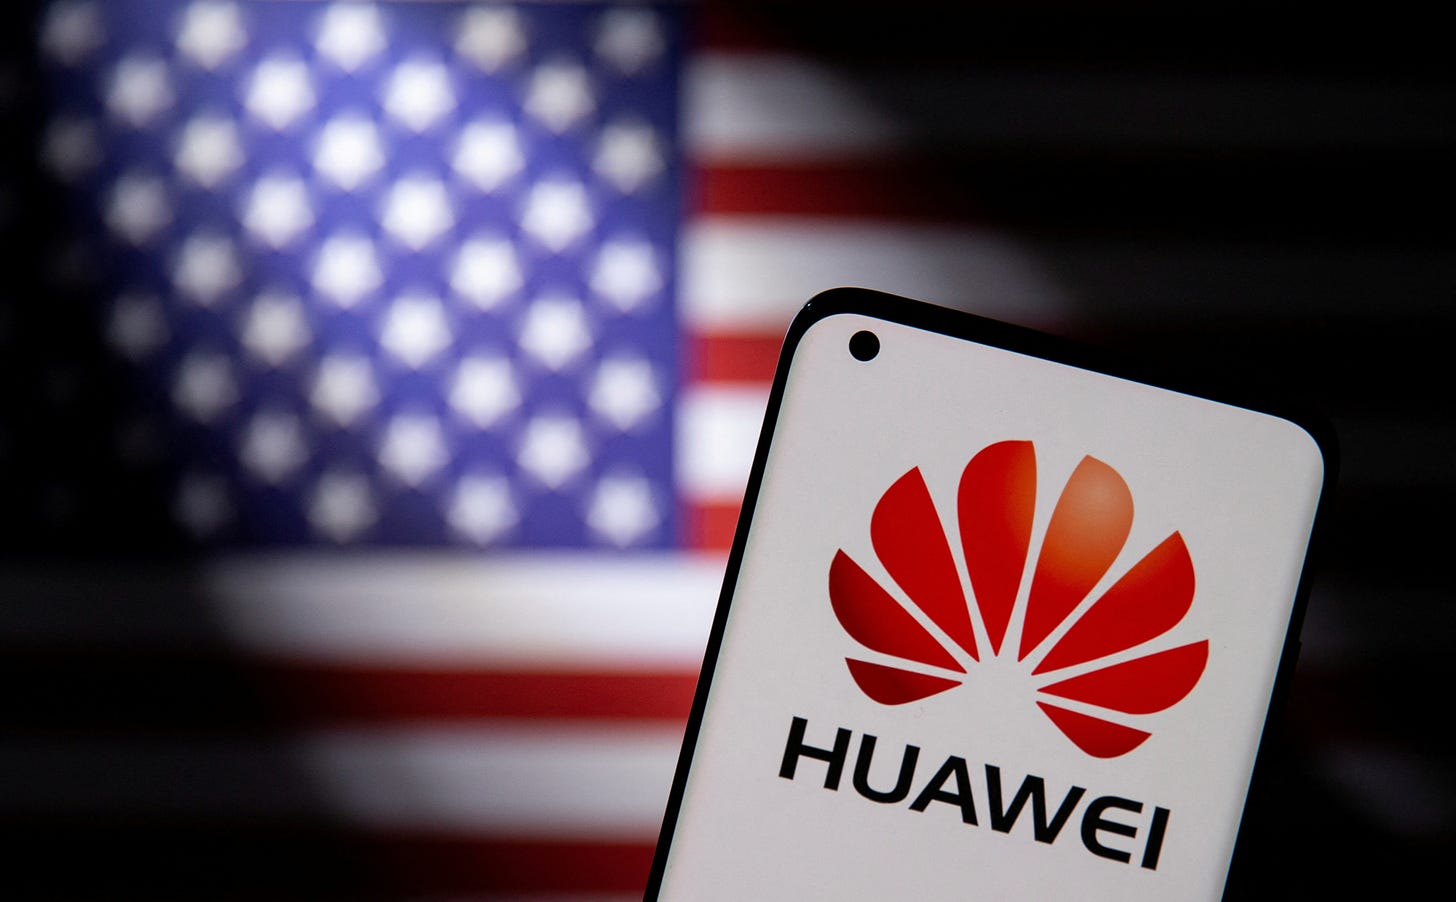 Smartphone with a Huawei logo is seen in front of U.S. flag in this illustration